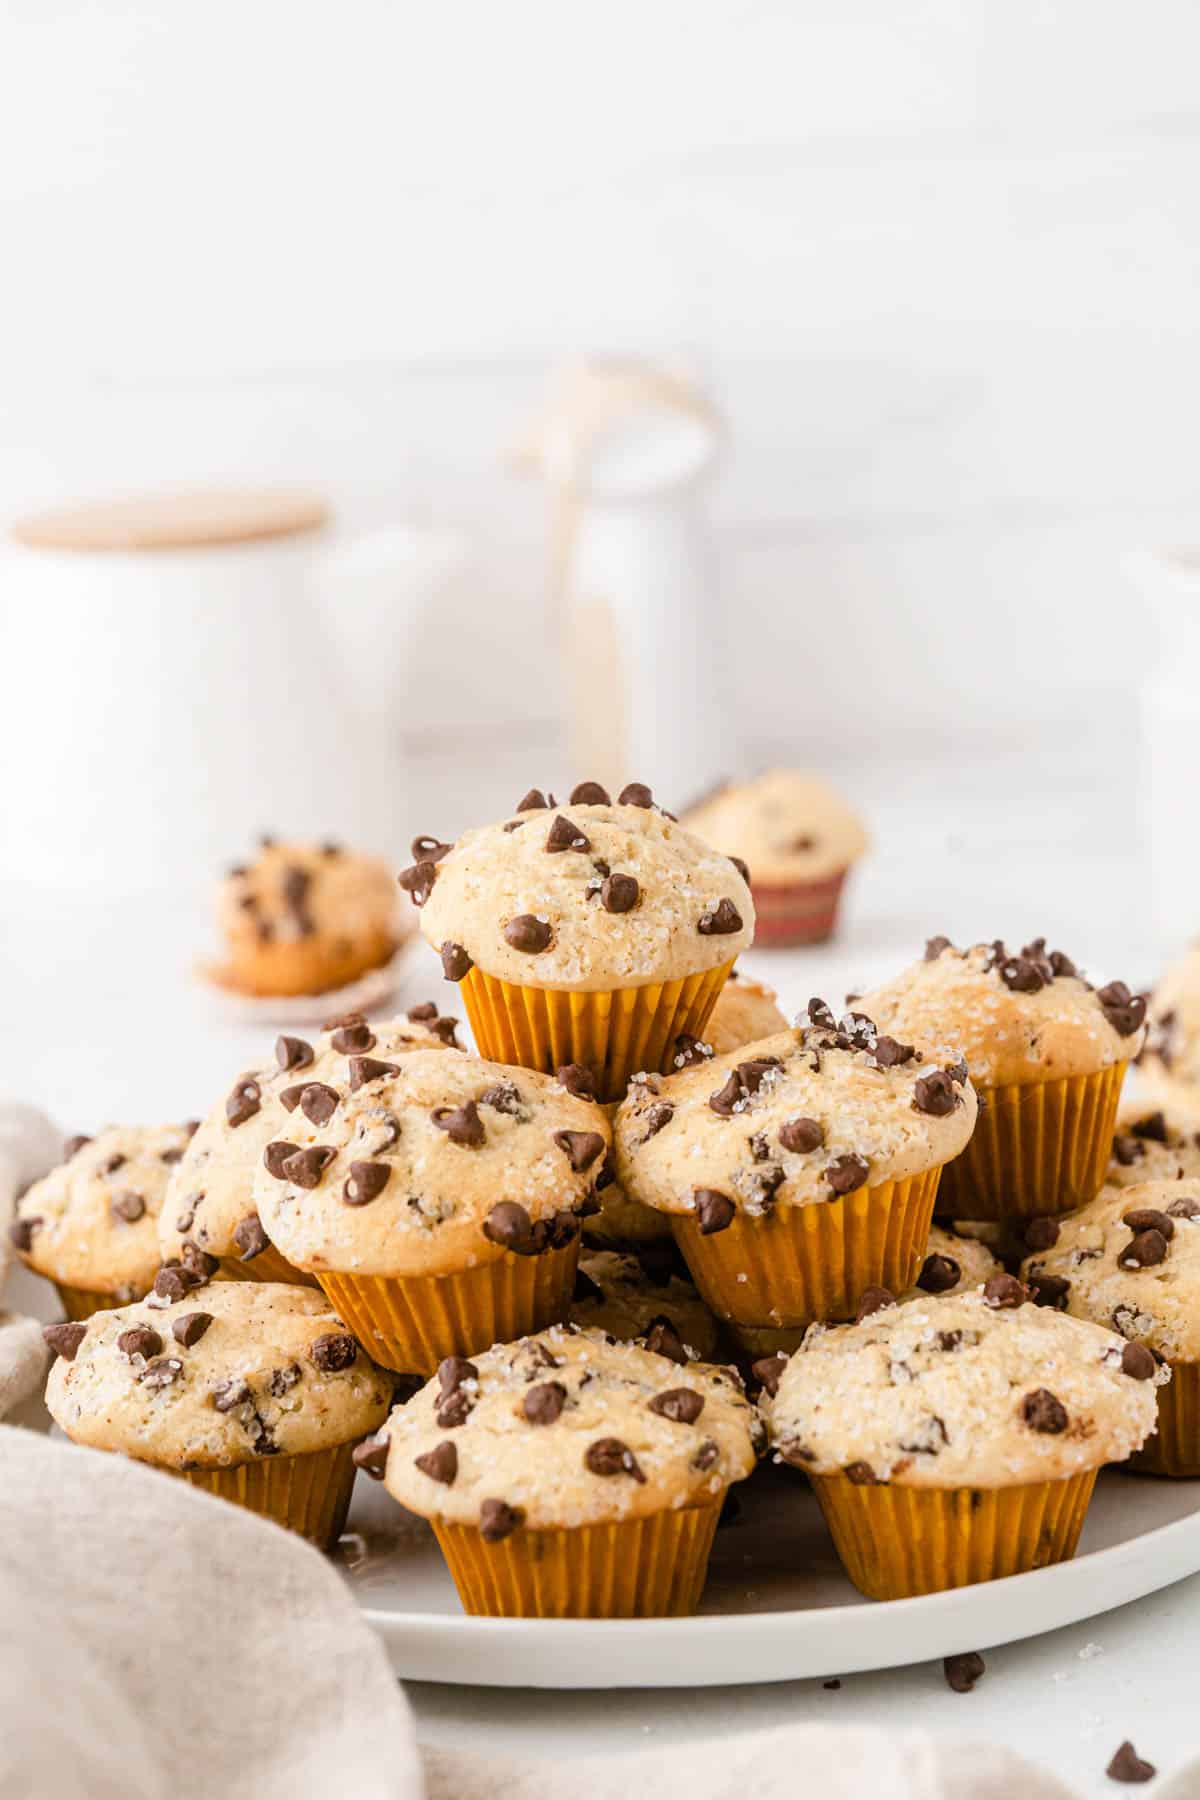 A stack of chocolate chip muffins on a plate.